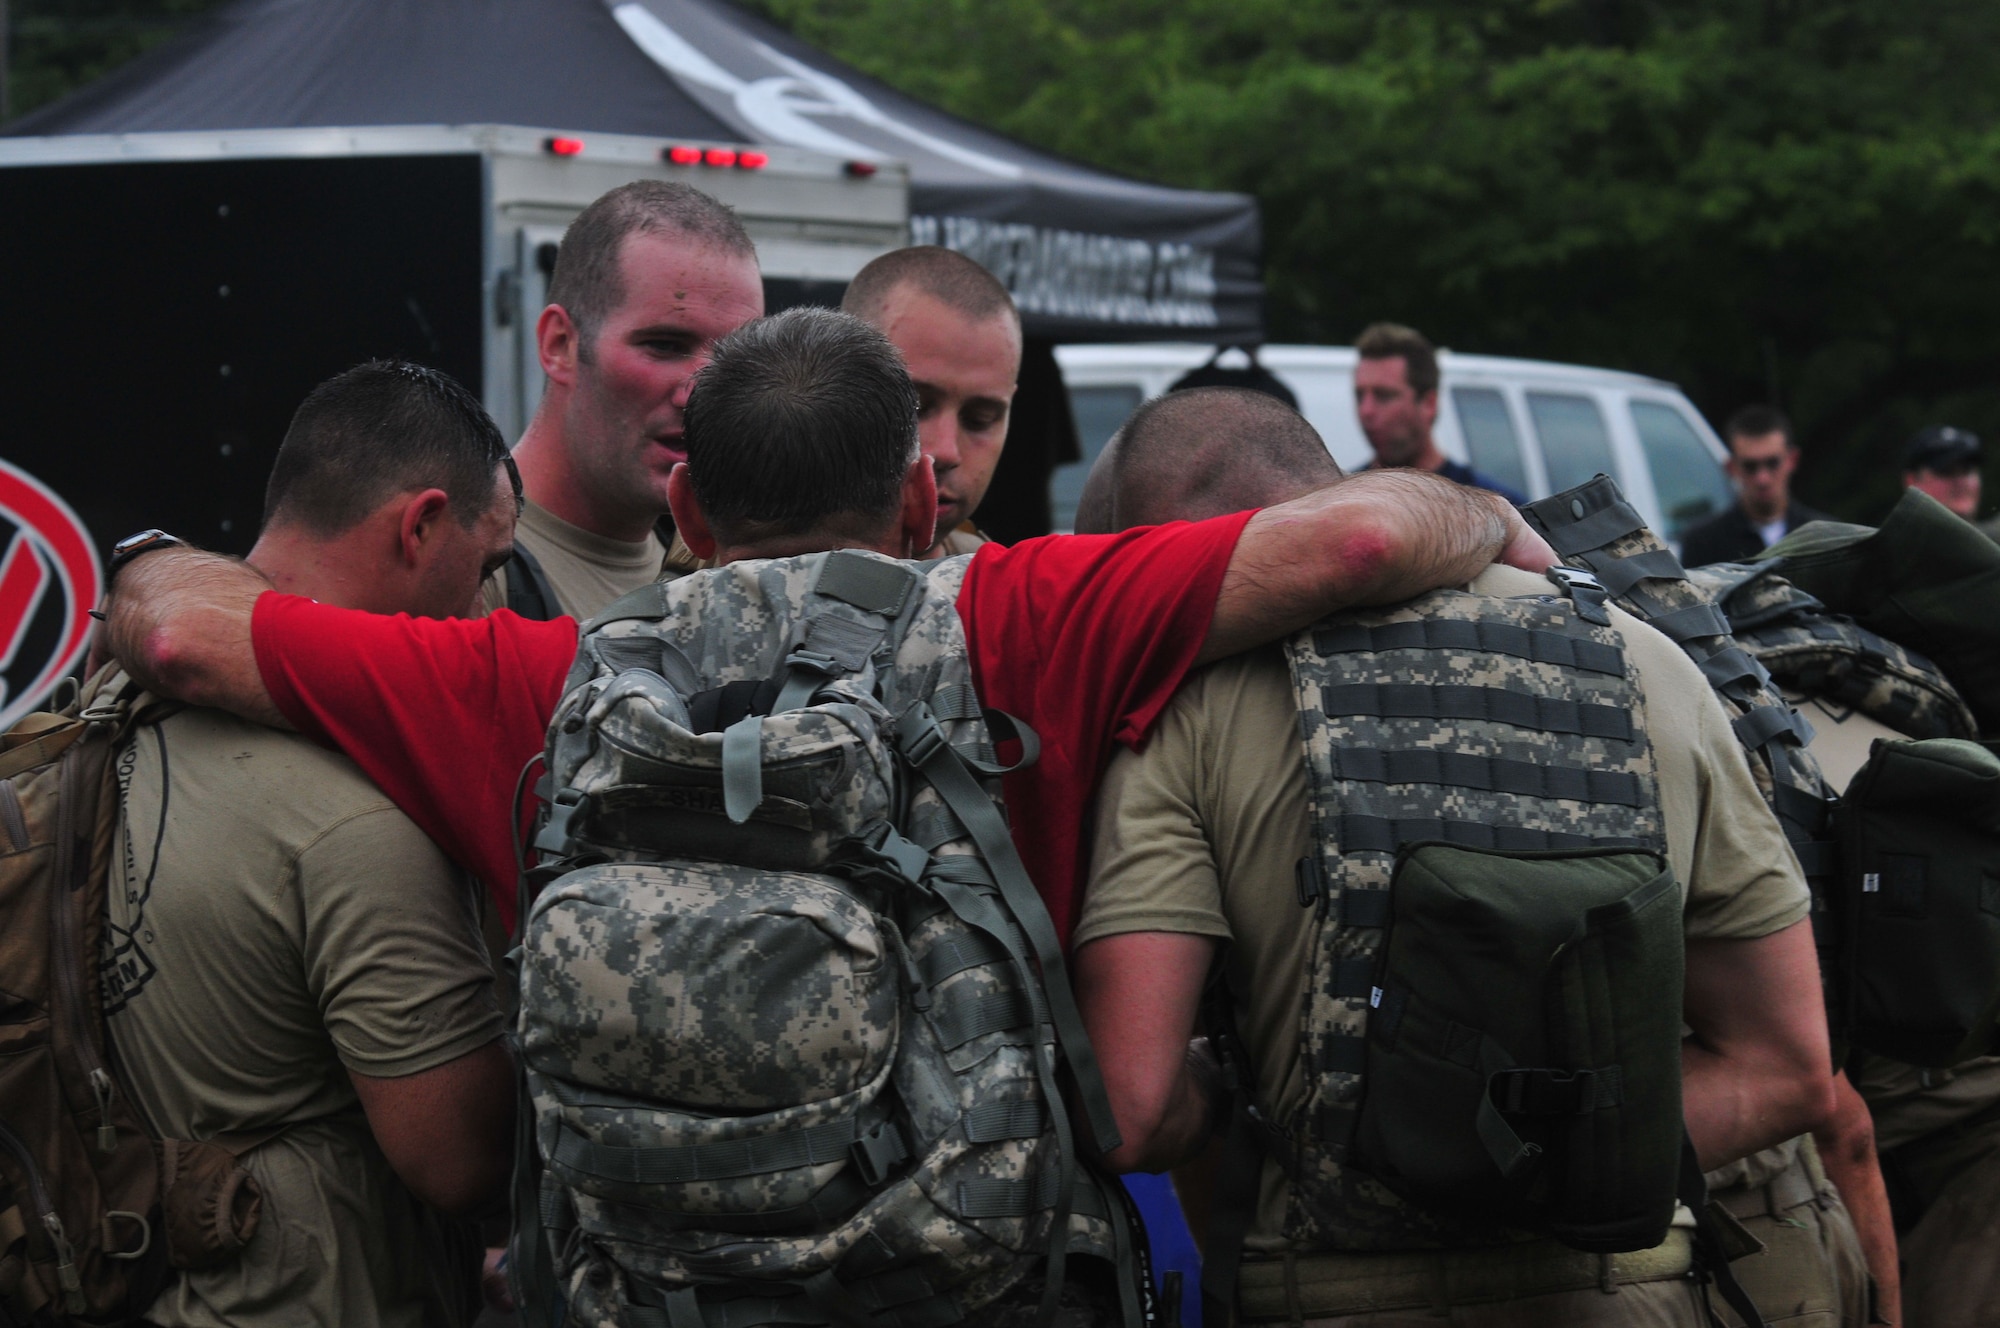 Chief Master Sgt. Tim Shaw (red t-shirt) huddles with exhausted members of the Connecticut Air National Guard Emergency Service Team during the annual Connecticut SWAT Challenge event at the West Hartford MDC Reservoir Aug. 25, 2011. The Guard team took 22nd place overall in the annual competition and earned the Top Military Team award for the second consecutive year. (U.S. Air Force photo by Tech. Sgt. Erin McNamara)